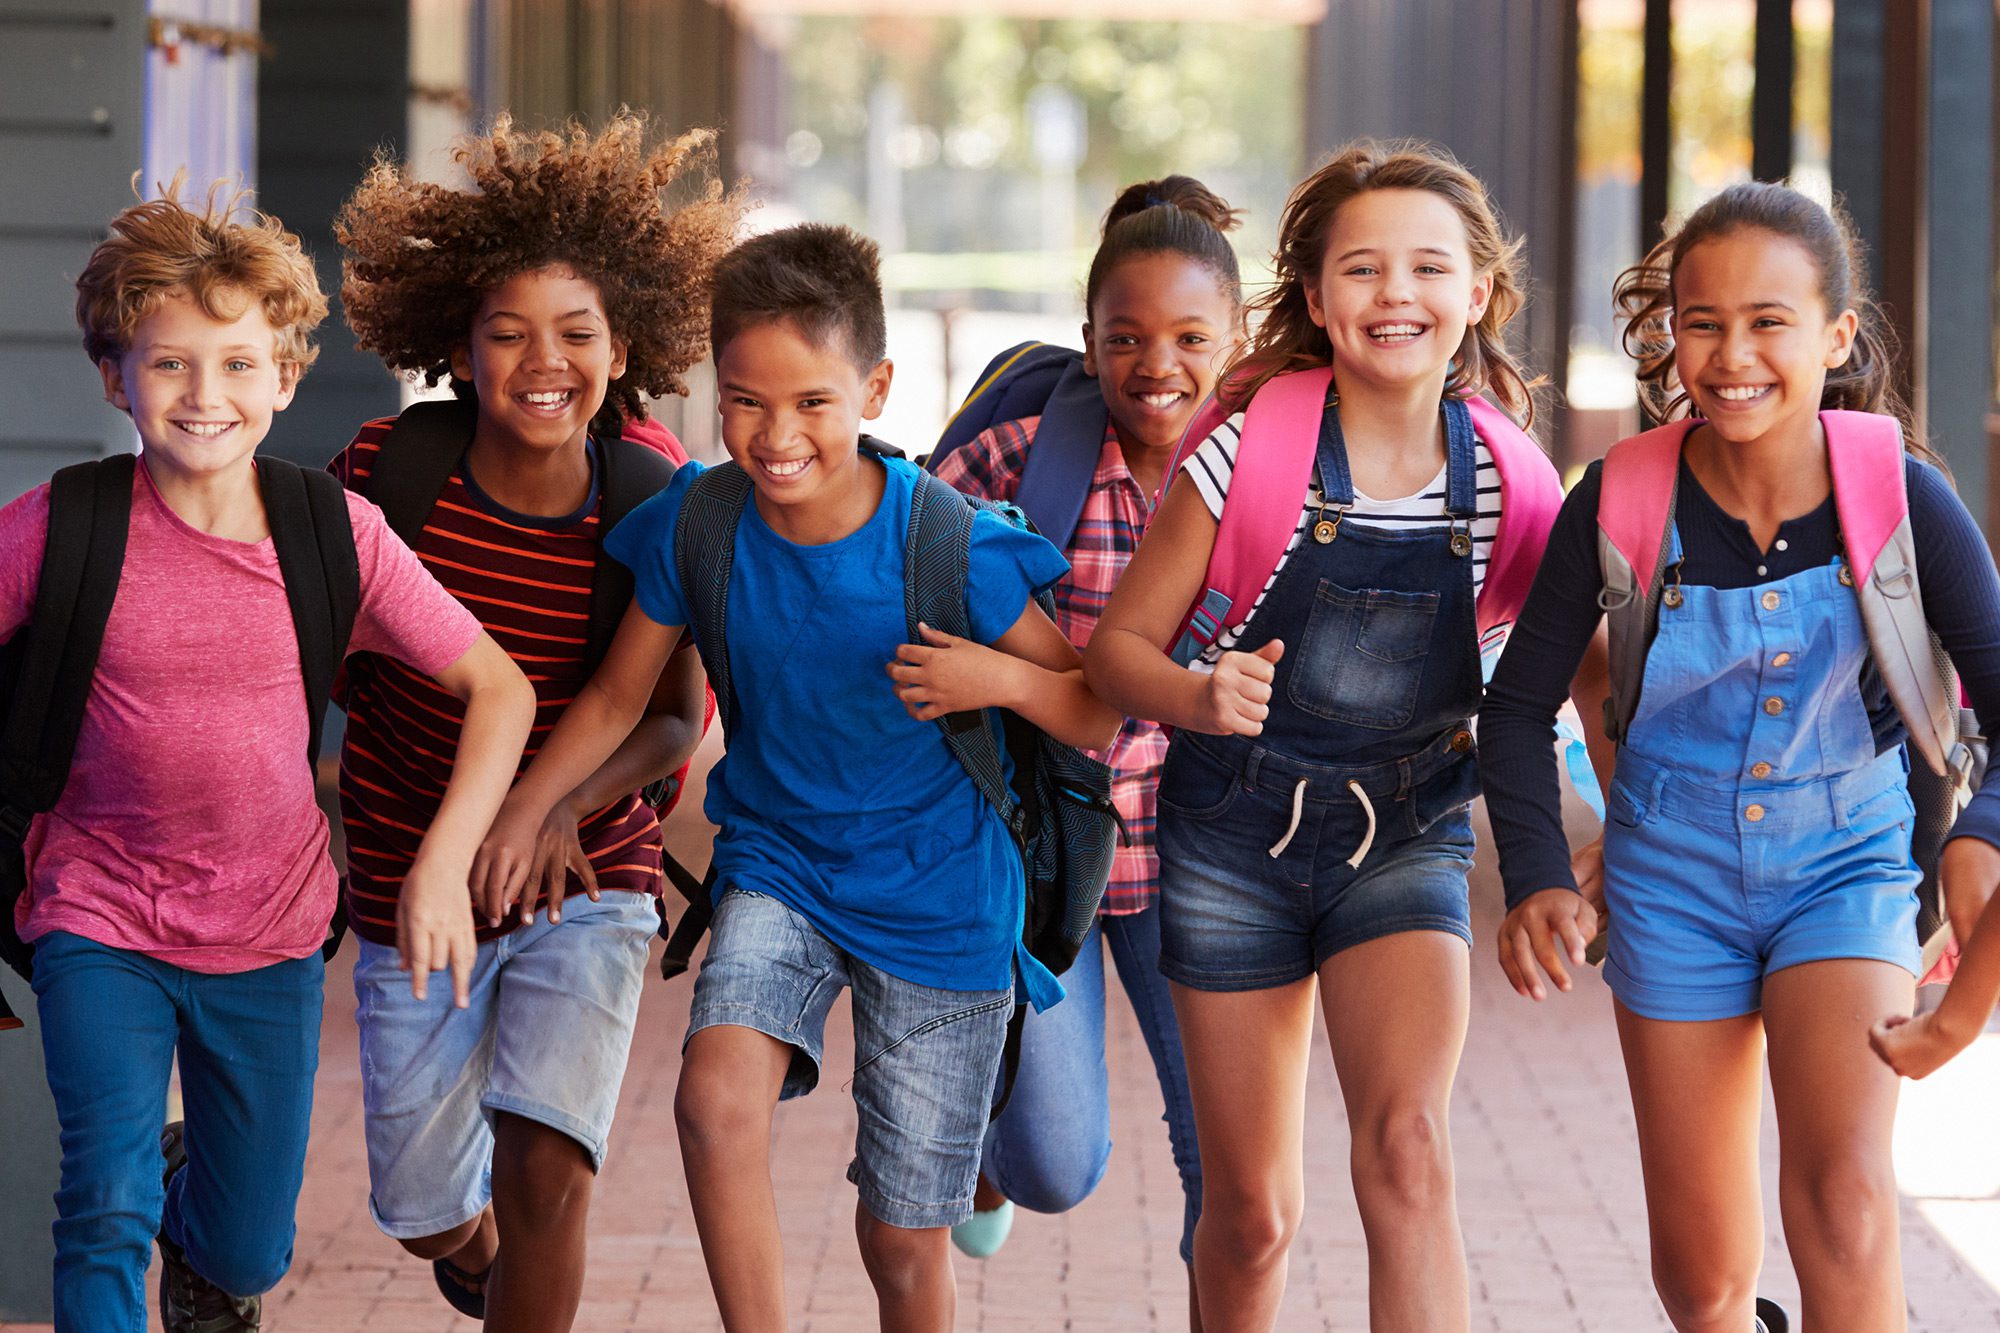 Diverse students happily running in school